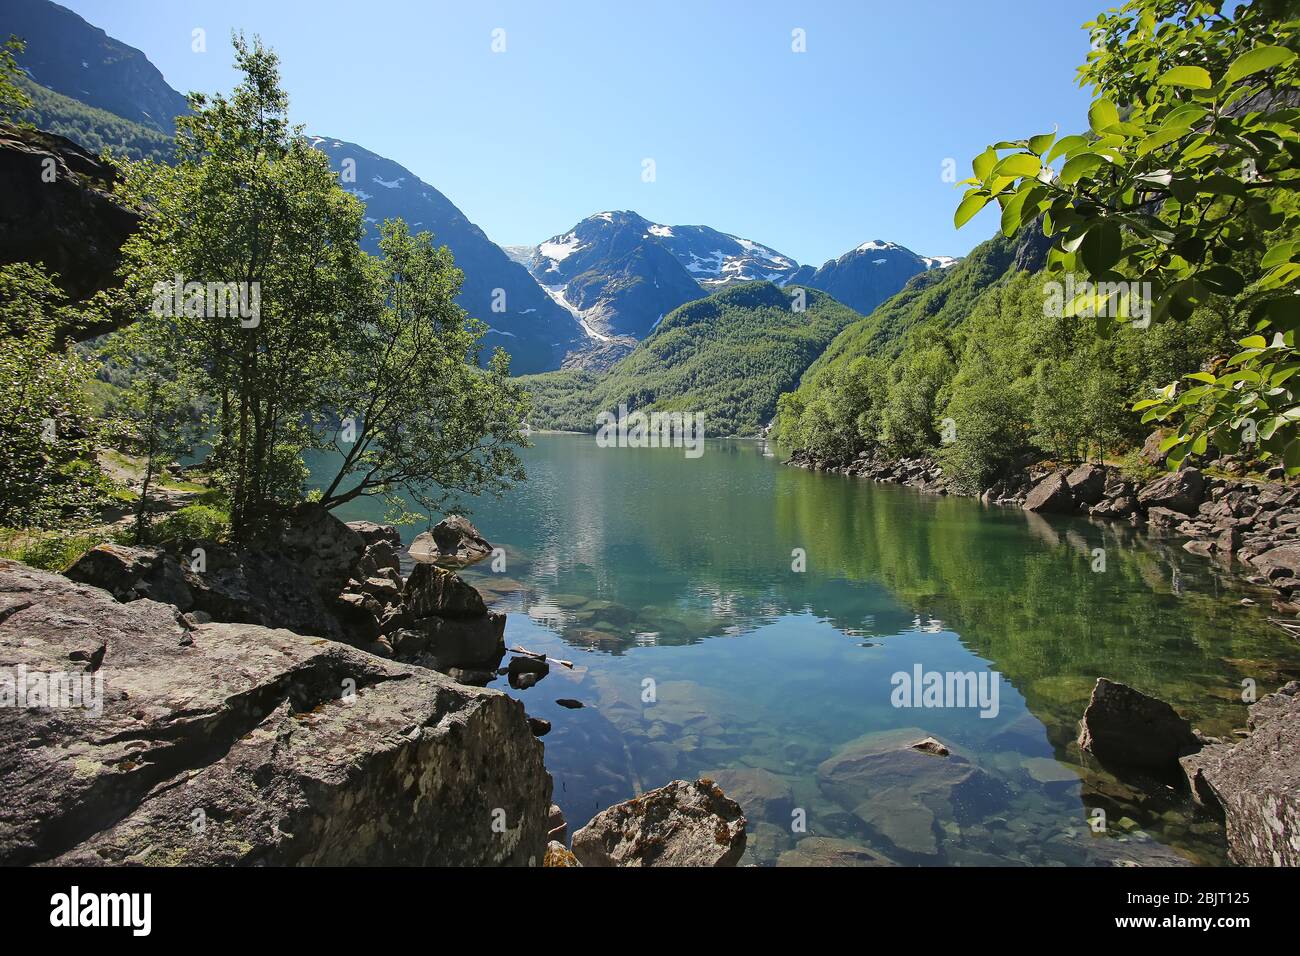 Bondhus Lake with beautiful scenery & reflections in the water. Reached along the mountain hike, near Rosendal, Folgefonna National Park, Norway. Stock Photo